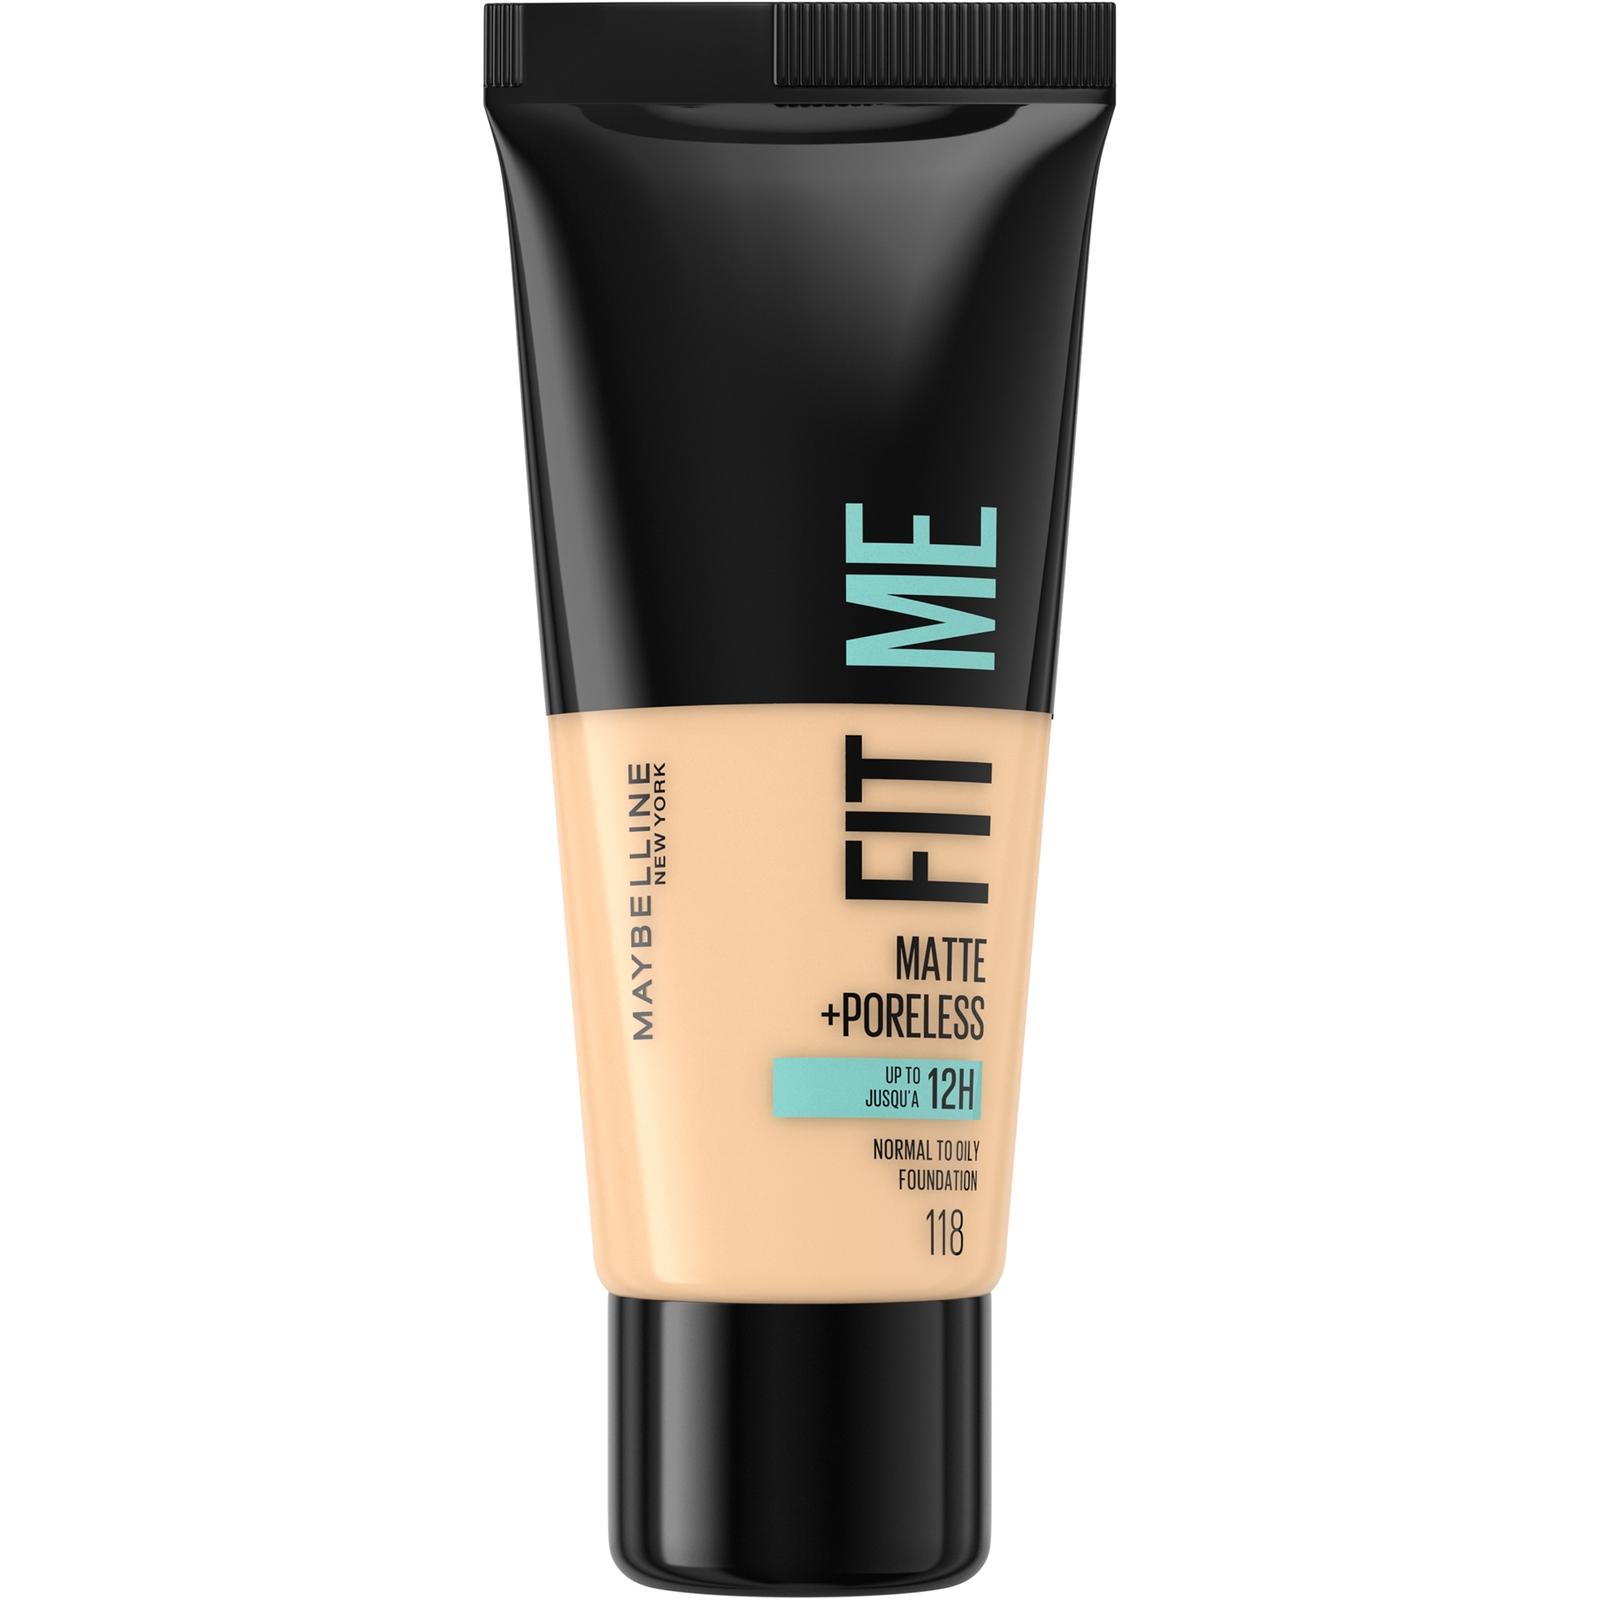 Maybelline Fit Me! Matte and Poreless Foundation 30ml (Various Shades) - 118 Light Beige